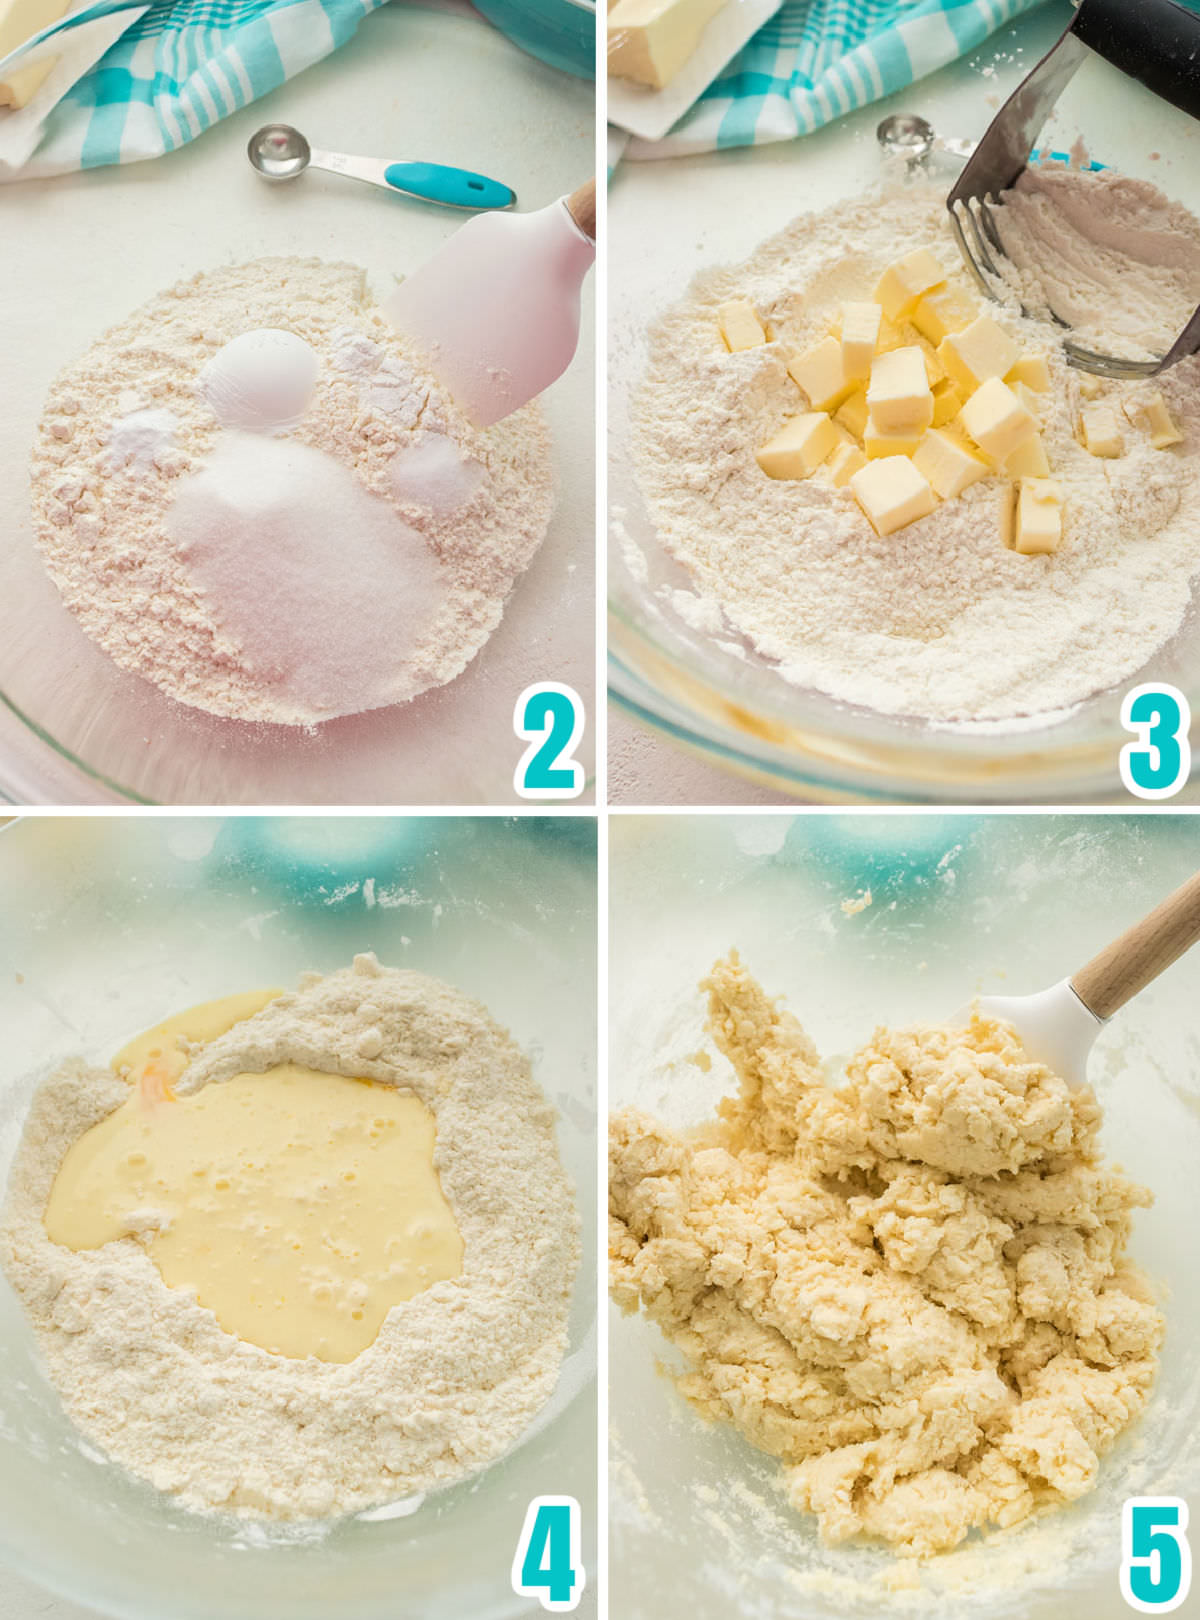 Collage image showing how to make the Buttermilk Biscuit dough.